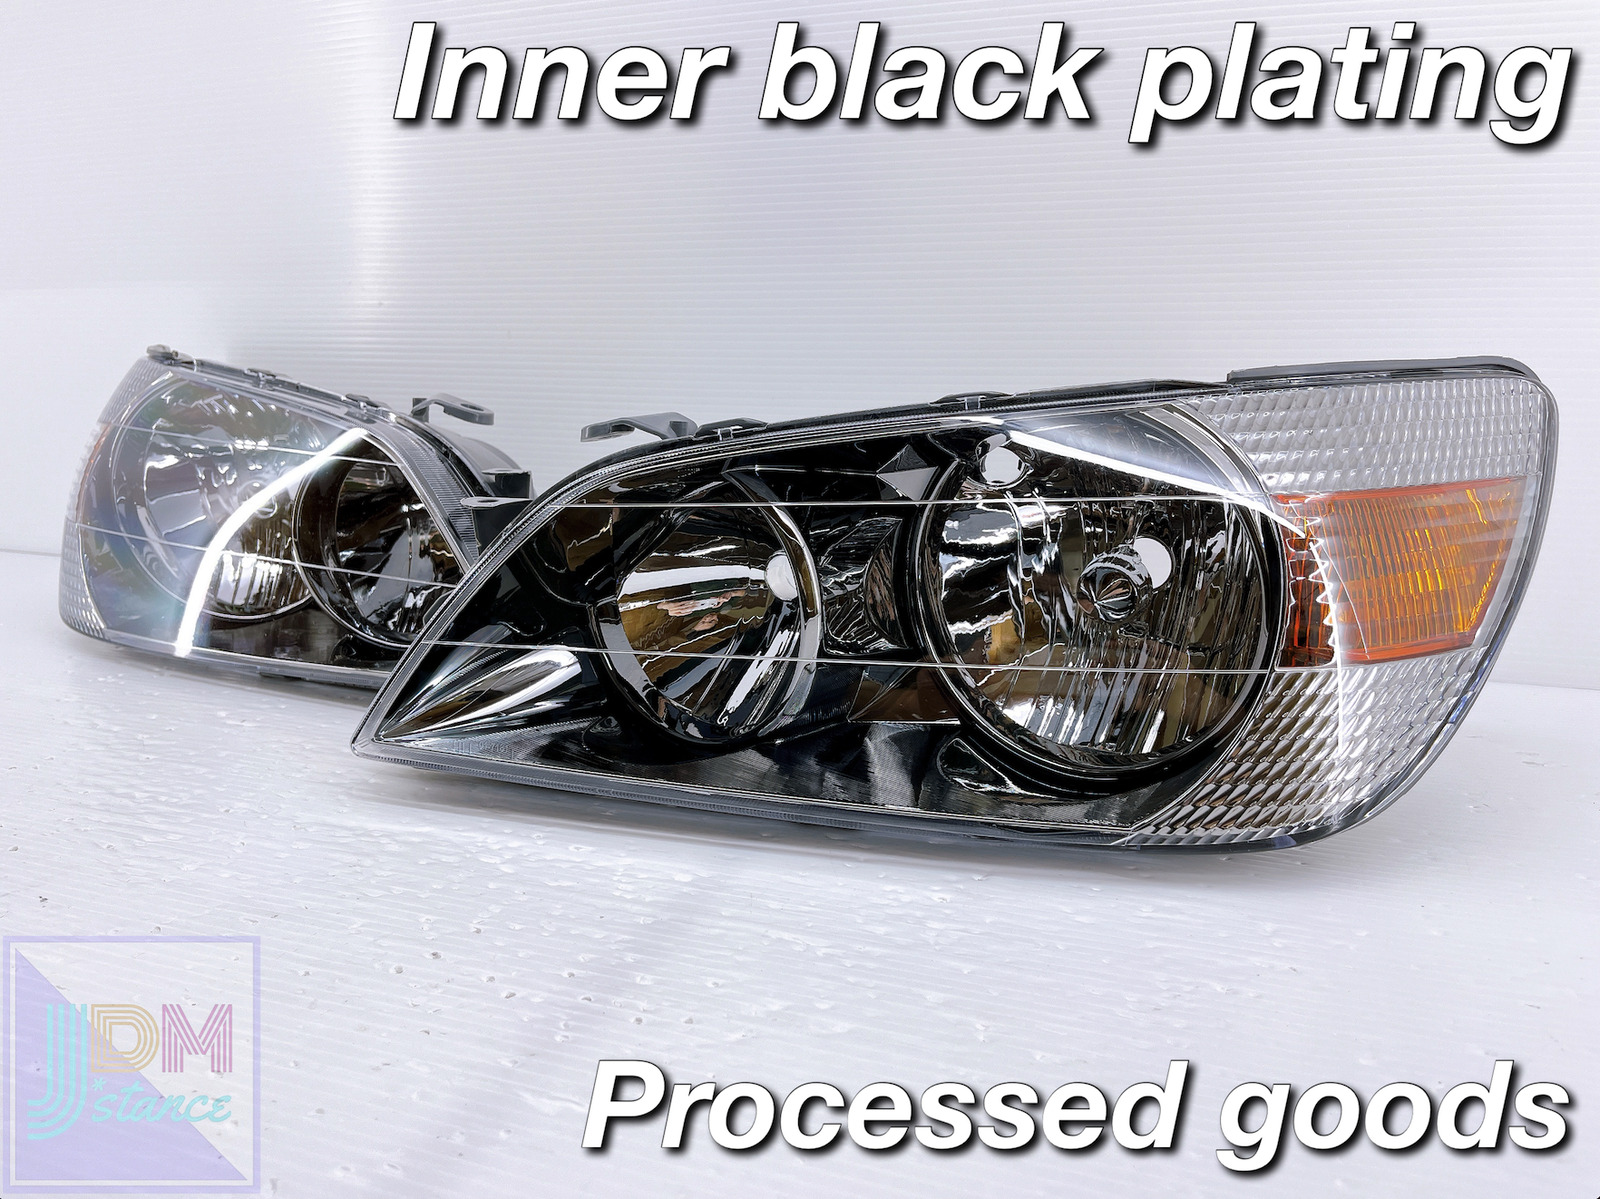 Toyota Altezza Early 98-01 Makeup headlight Inner black plating IS200 SEX10 